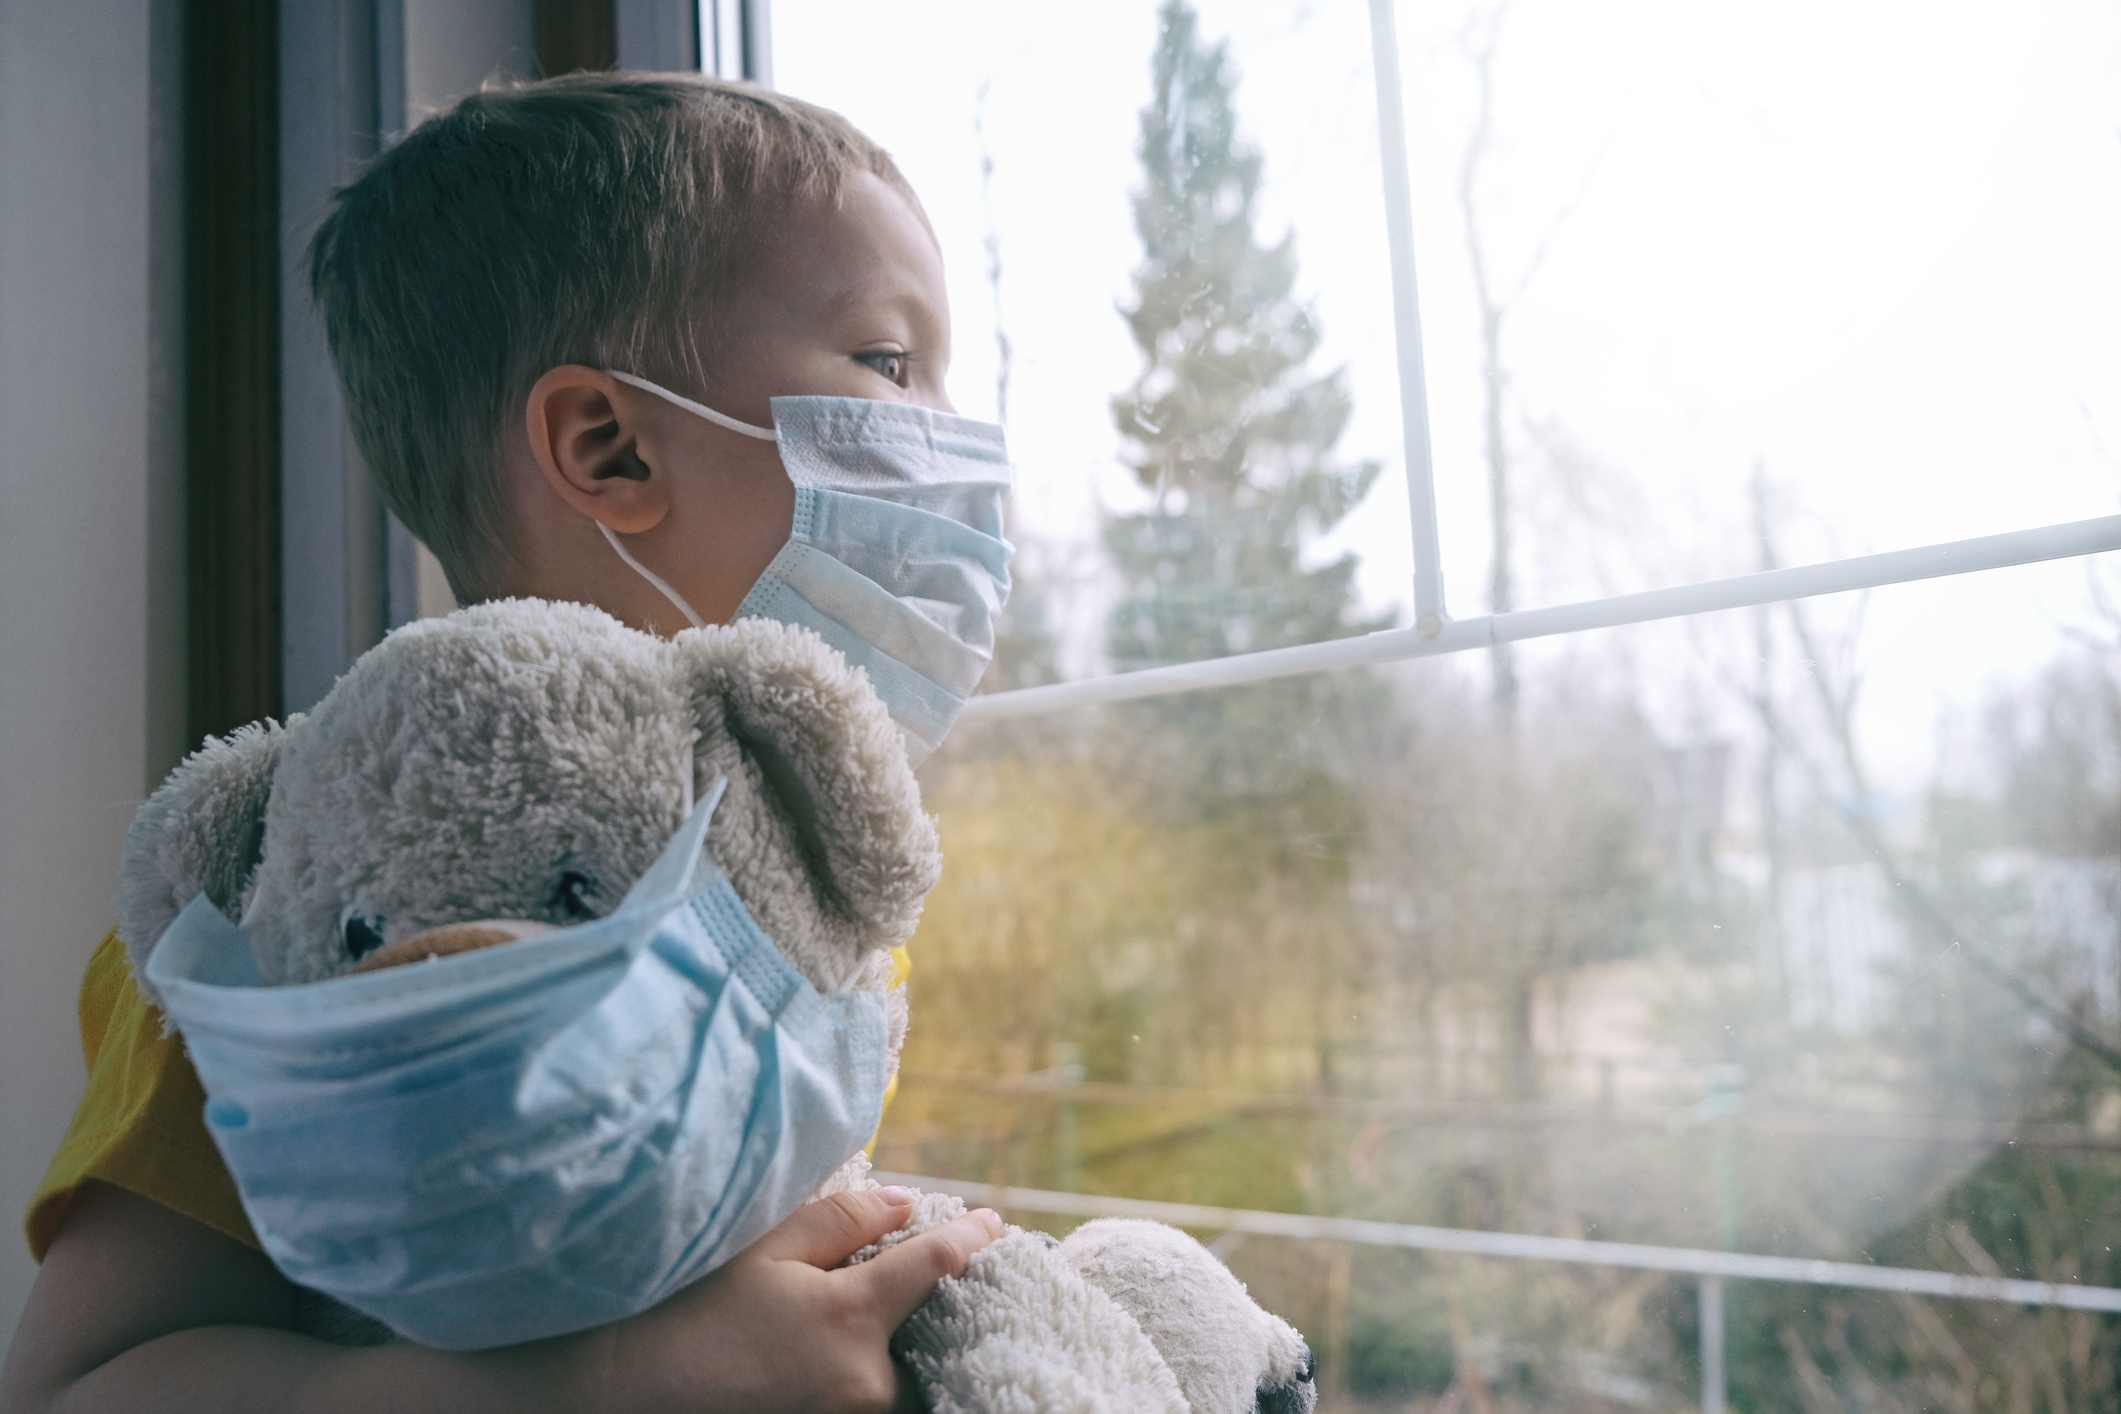 Child holding teddy bear, both wearing masks, looking out the window